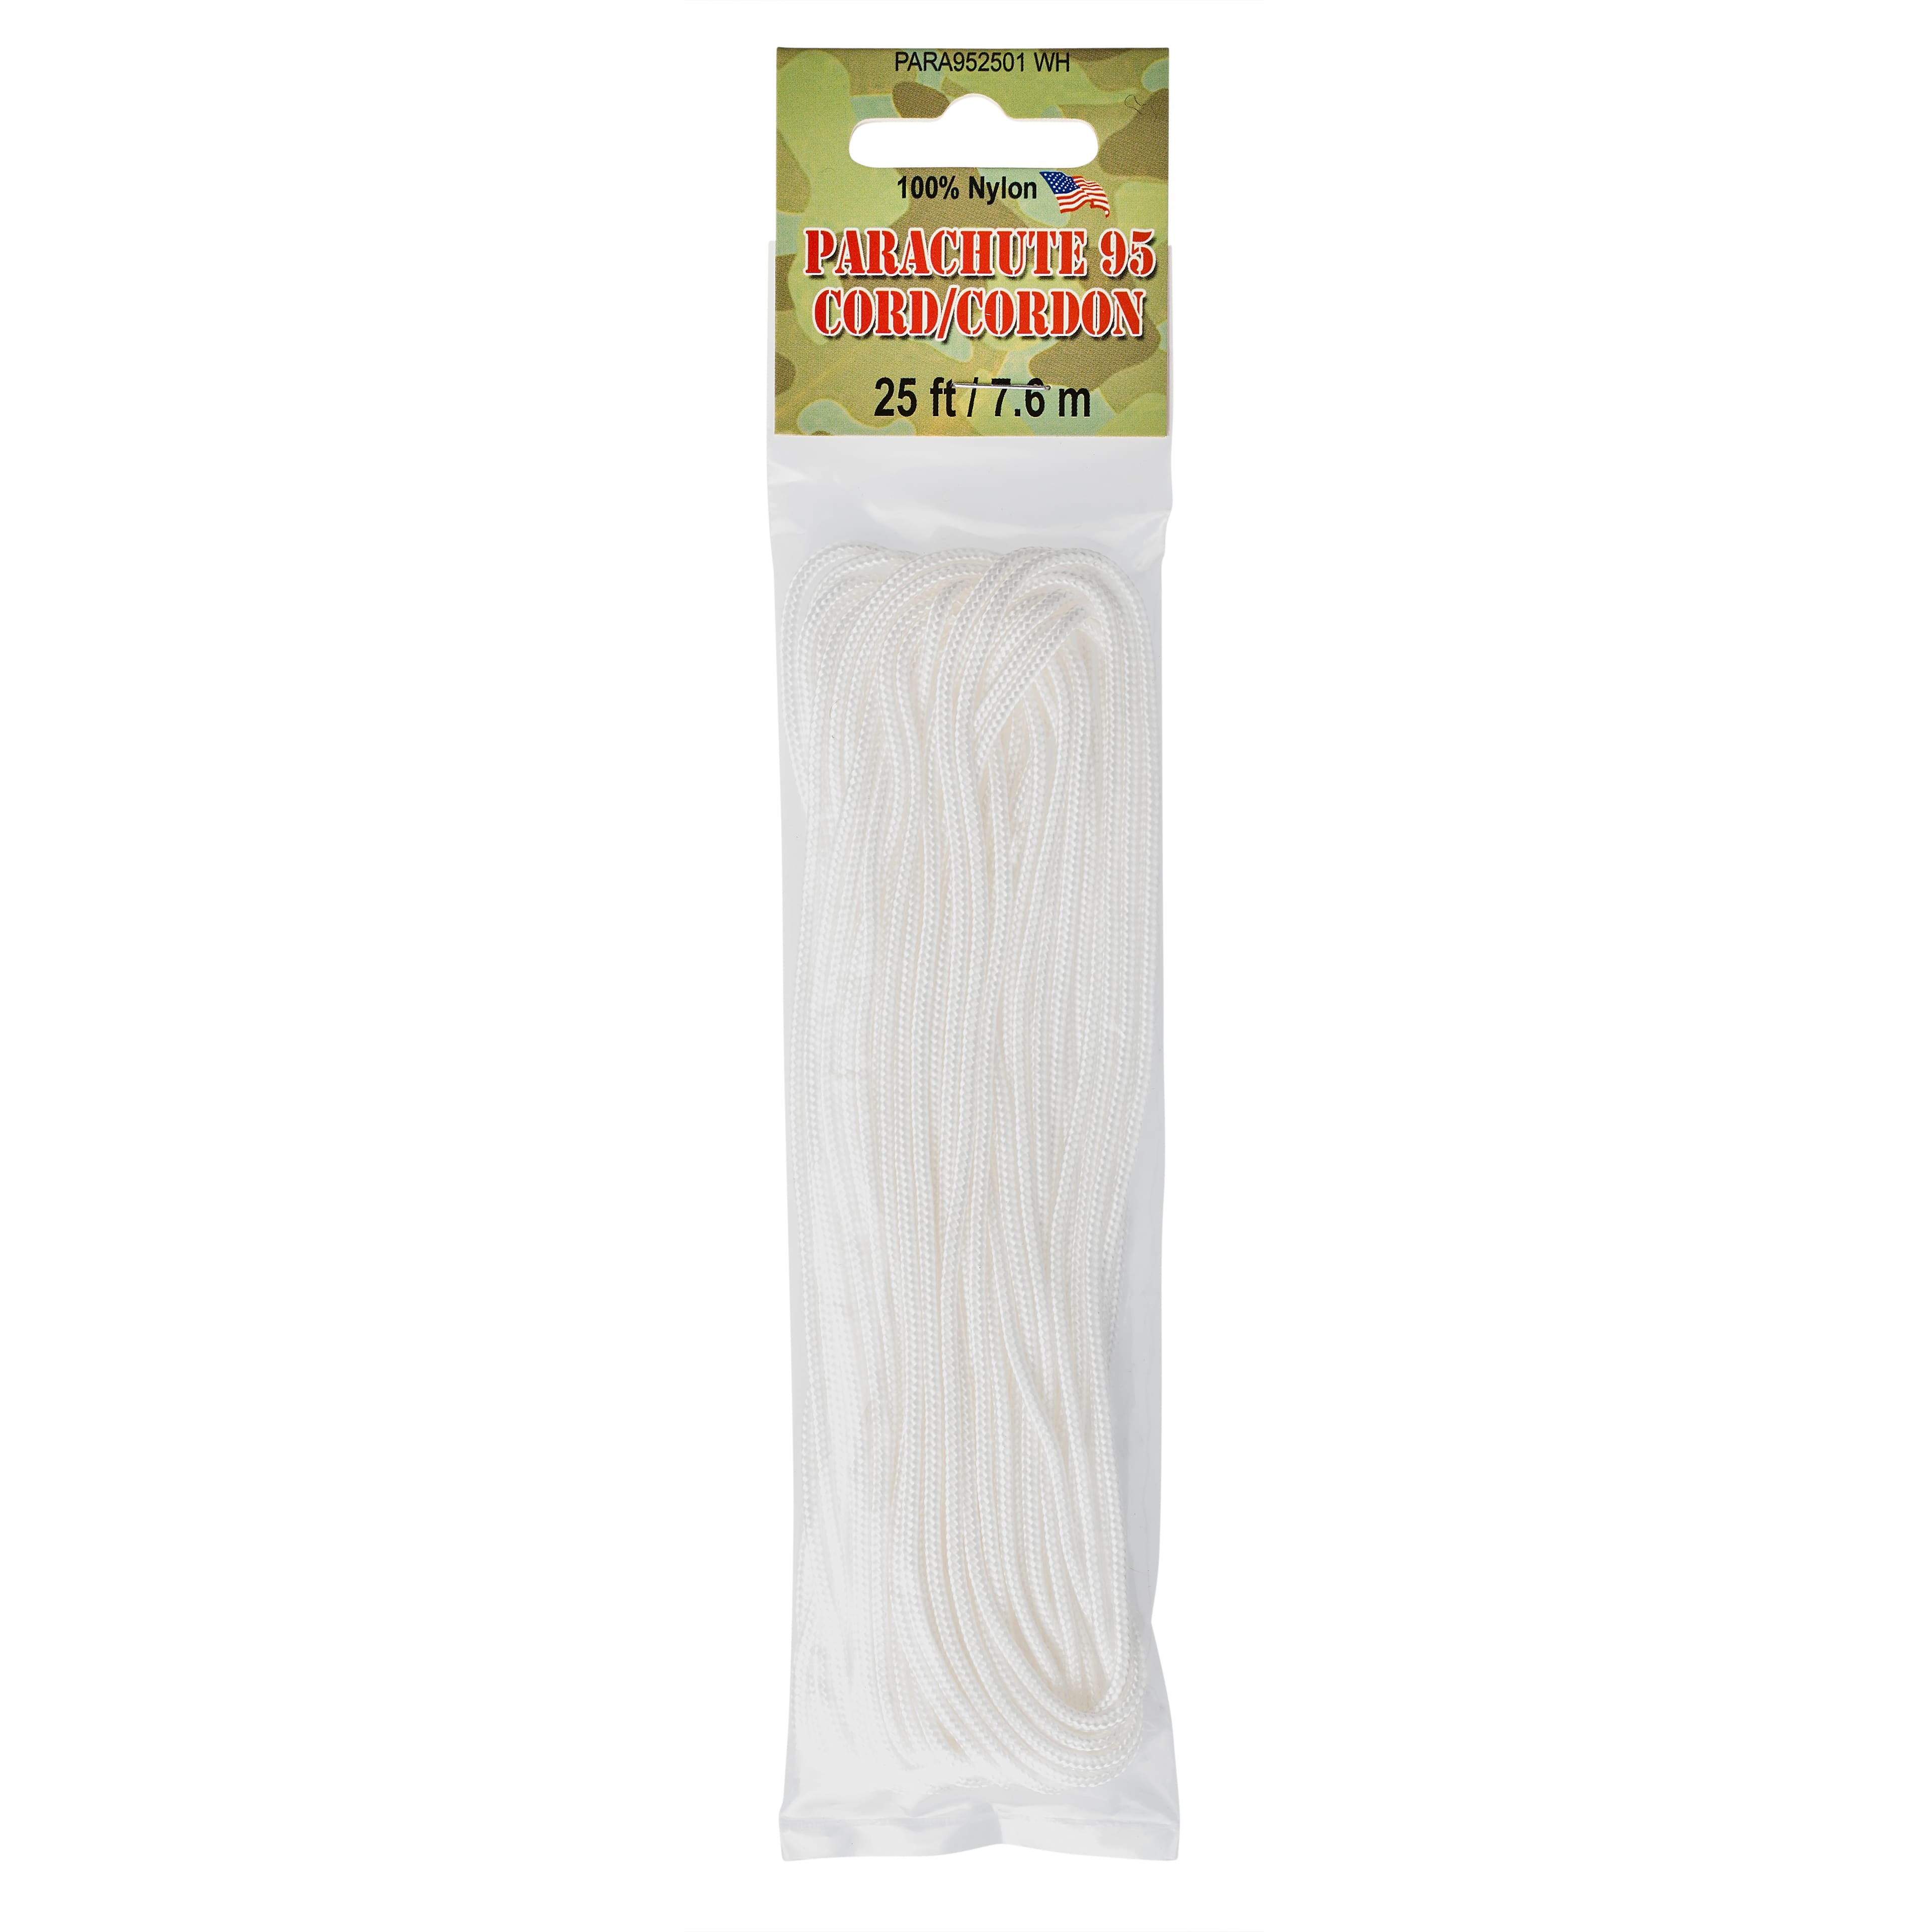 12 Pack: Parachute 95 25ft. Cord